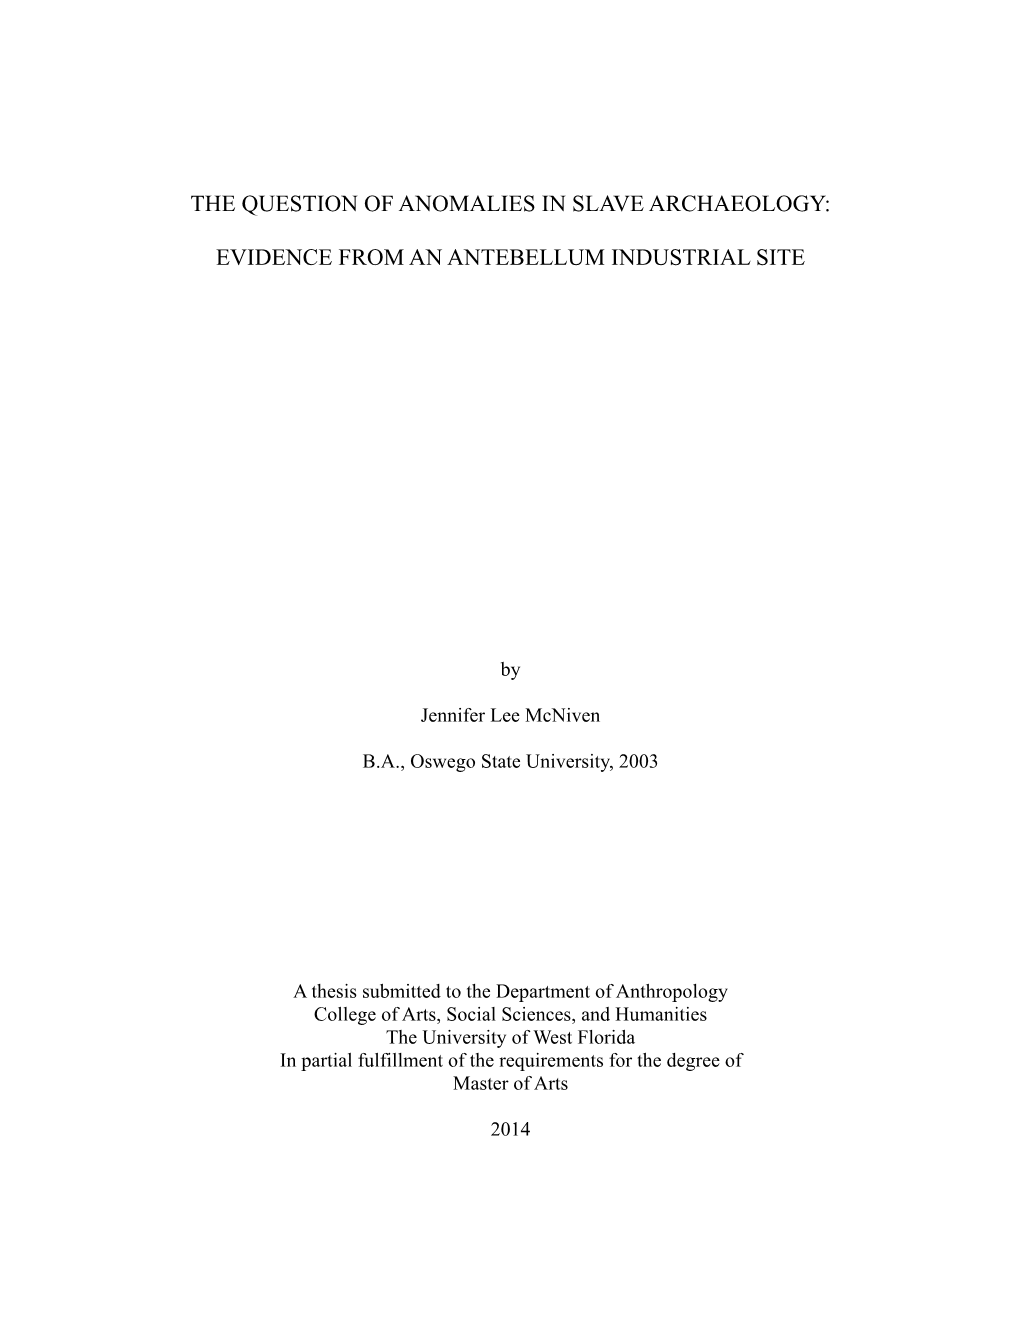 The Question of Anomalies in Slave Archaeology